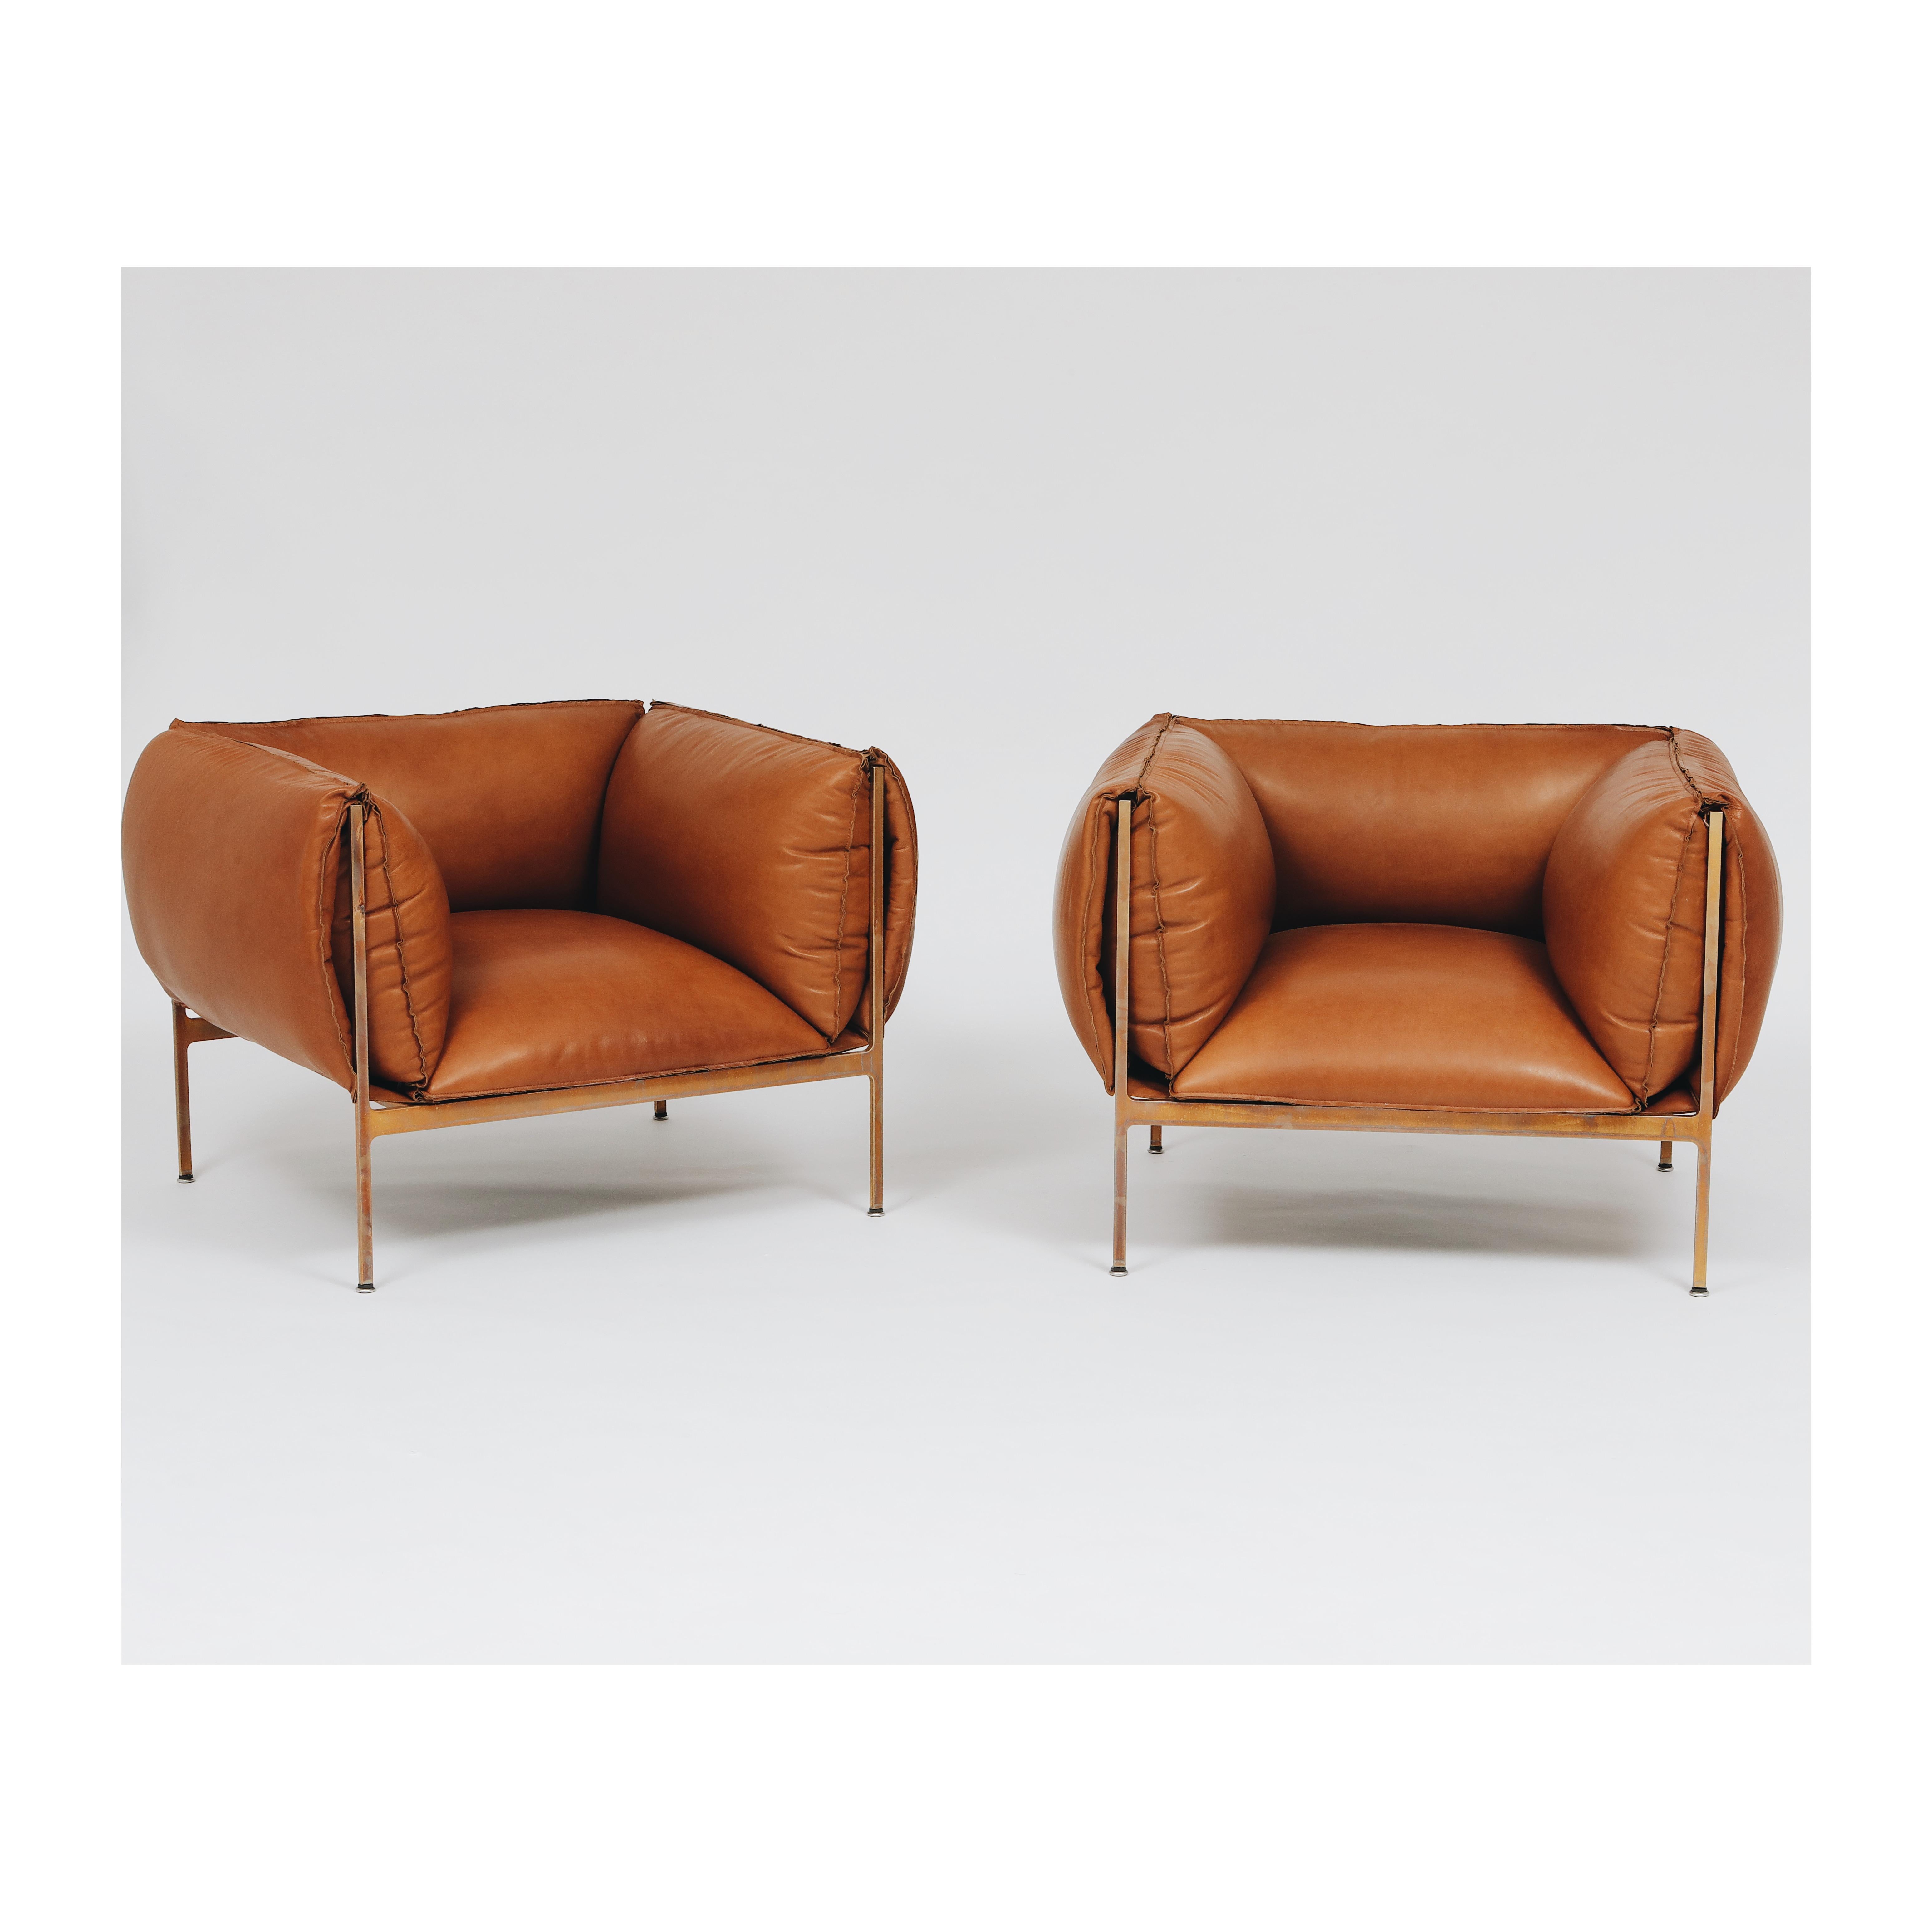 Modern Armchair in Cognac Leather and Burnished Brass-Plated Laser-Cut Steel Frame For Sale